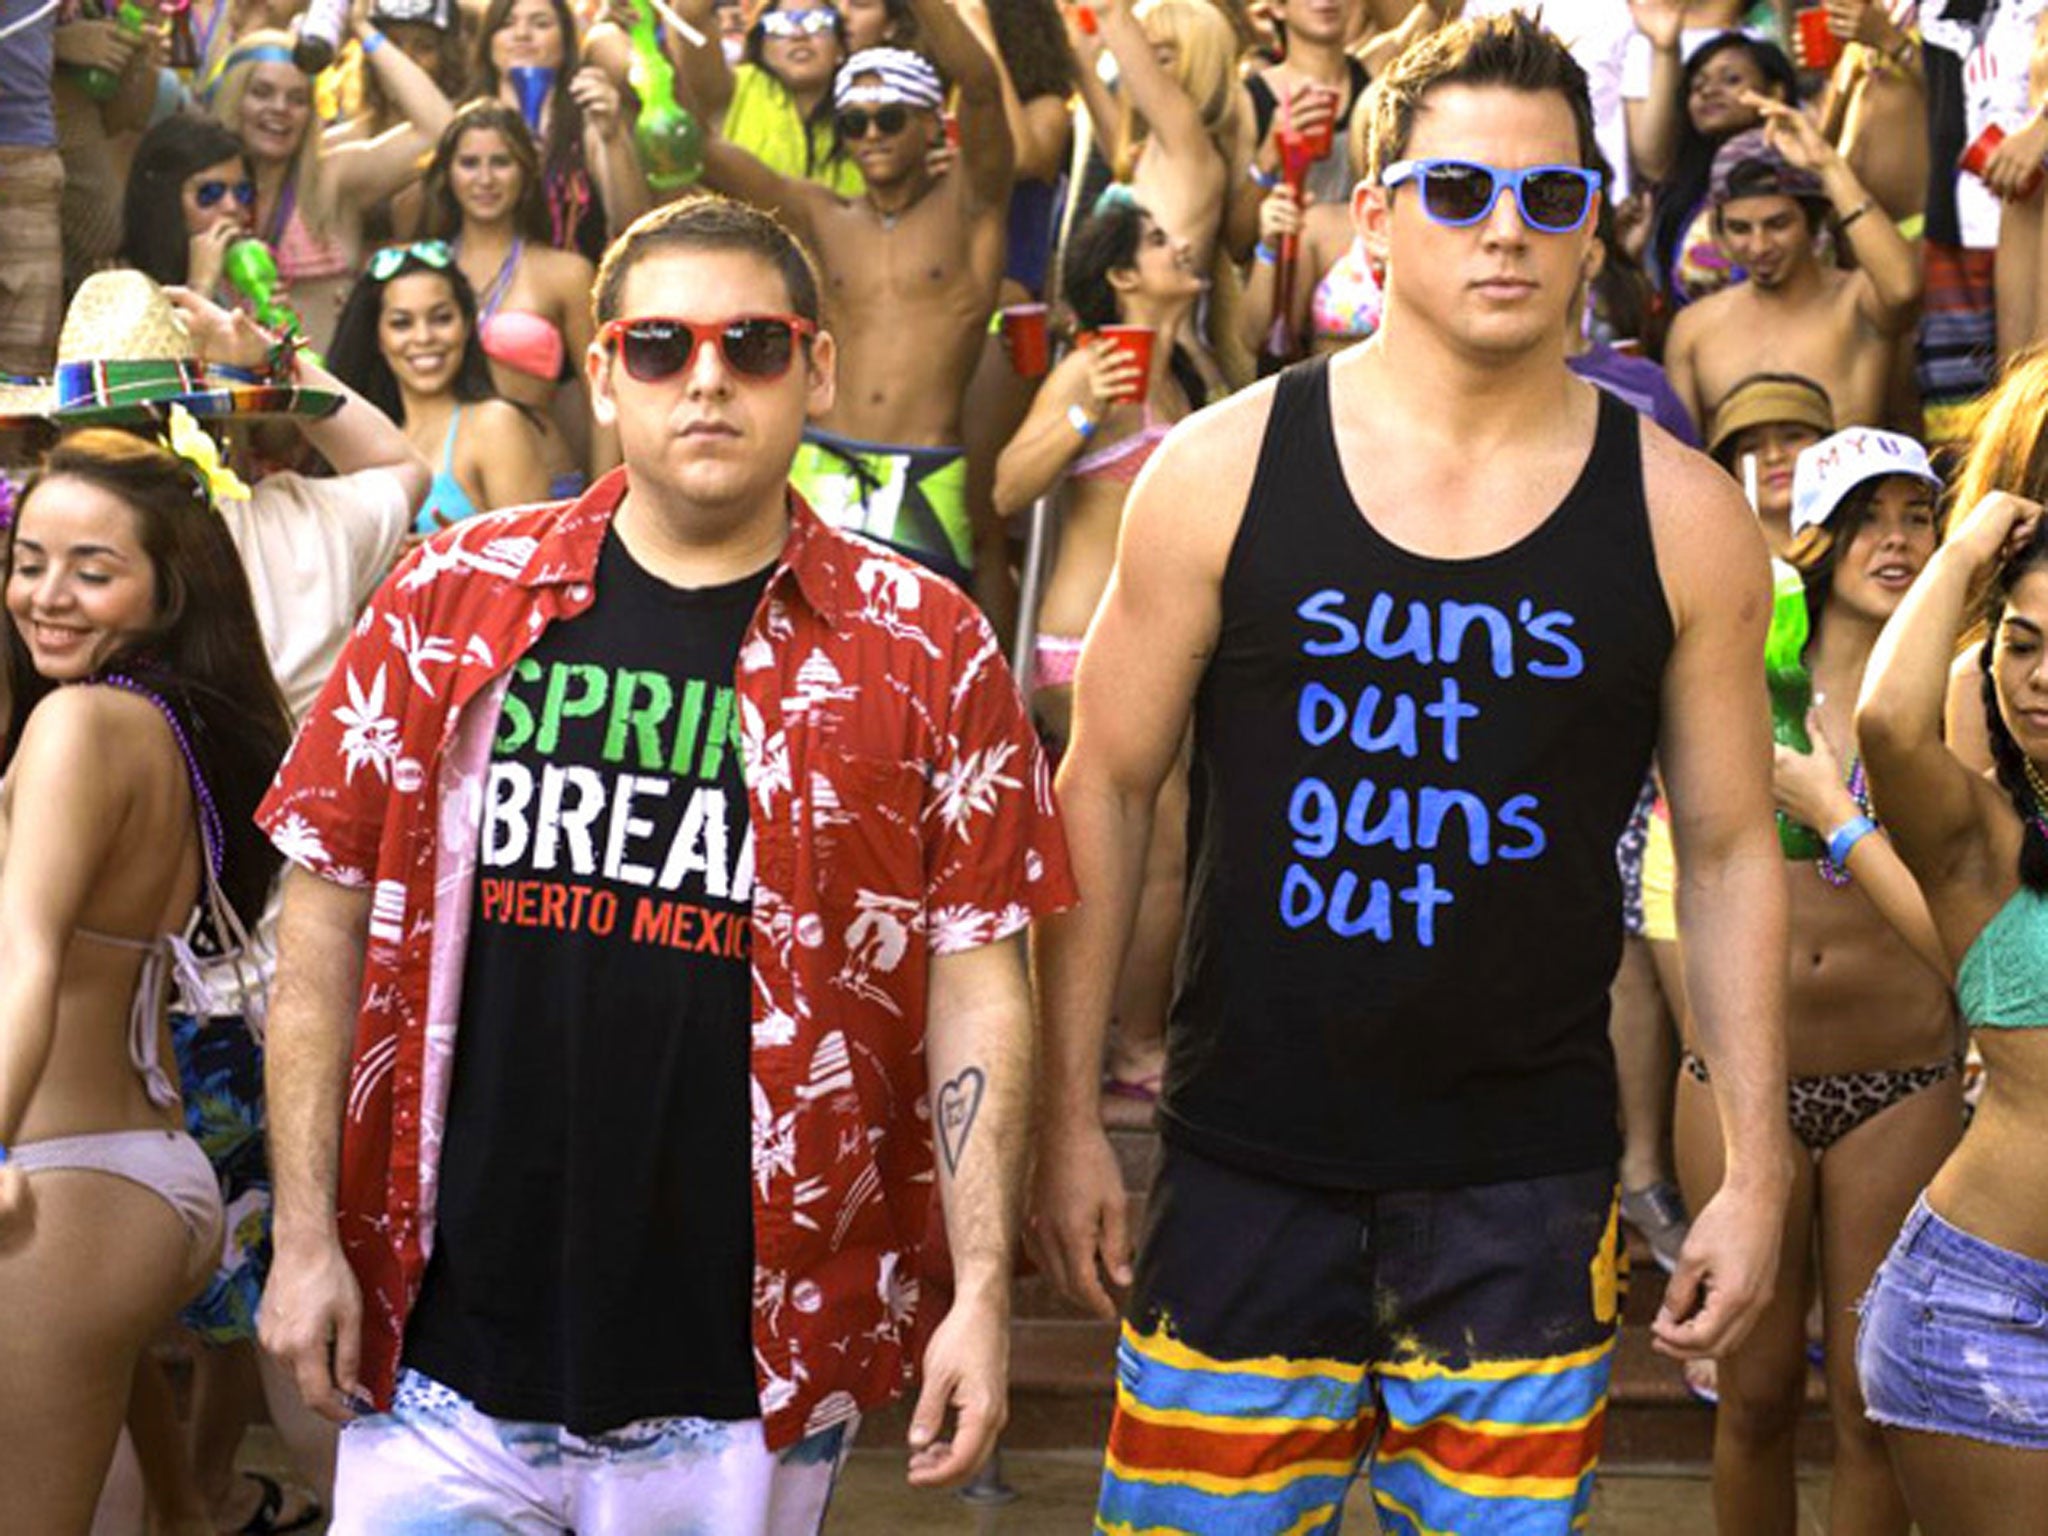 Jonah Hill and Channing Tatum are back for 22 Jump Street, out in June